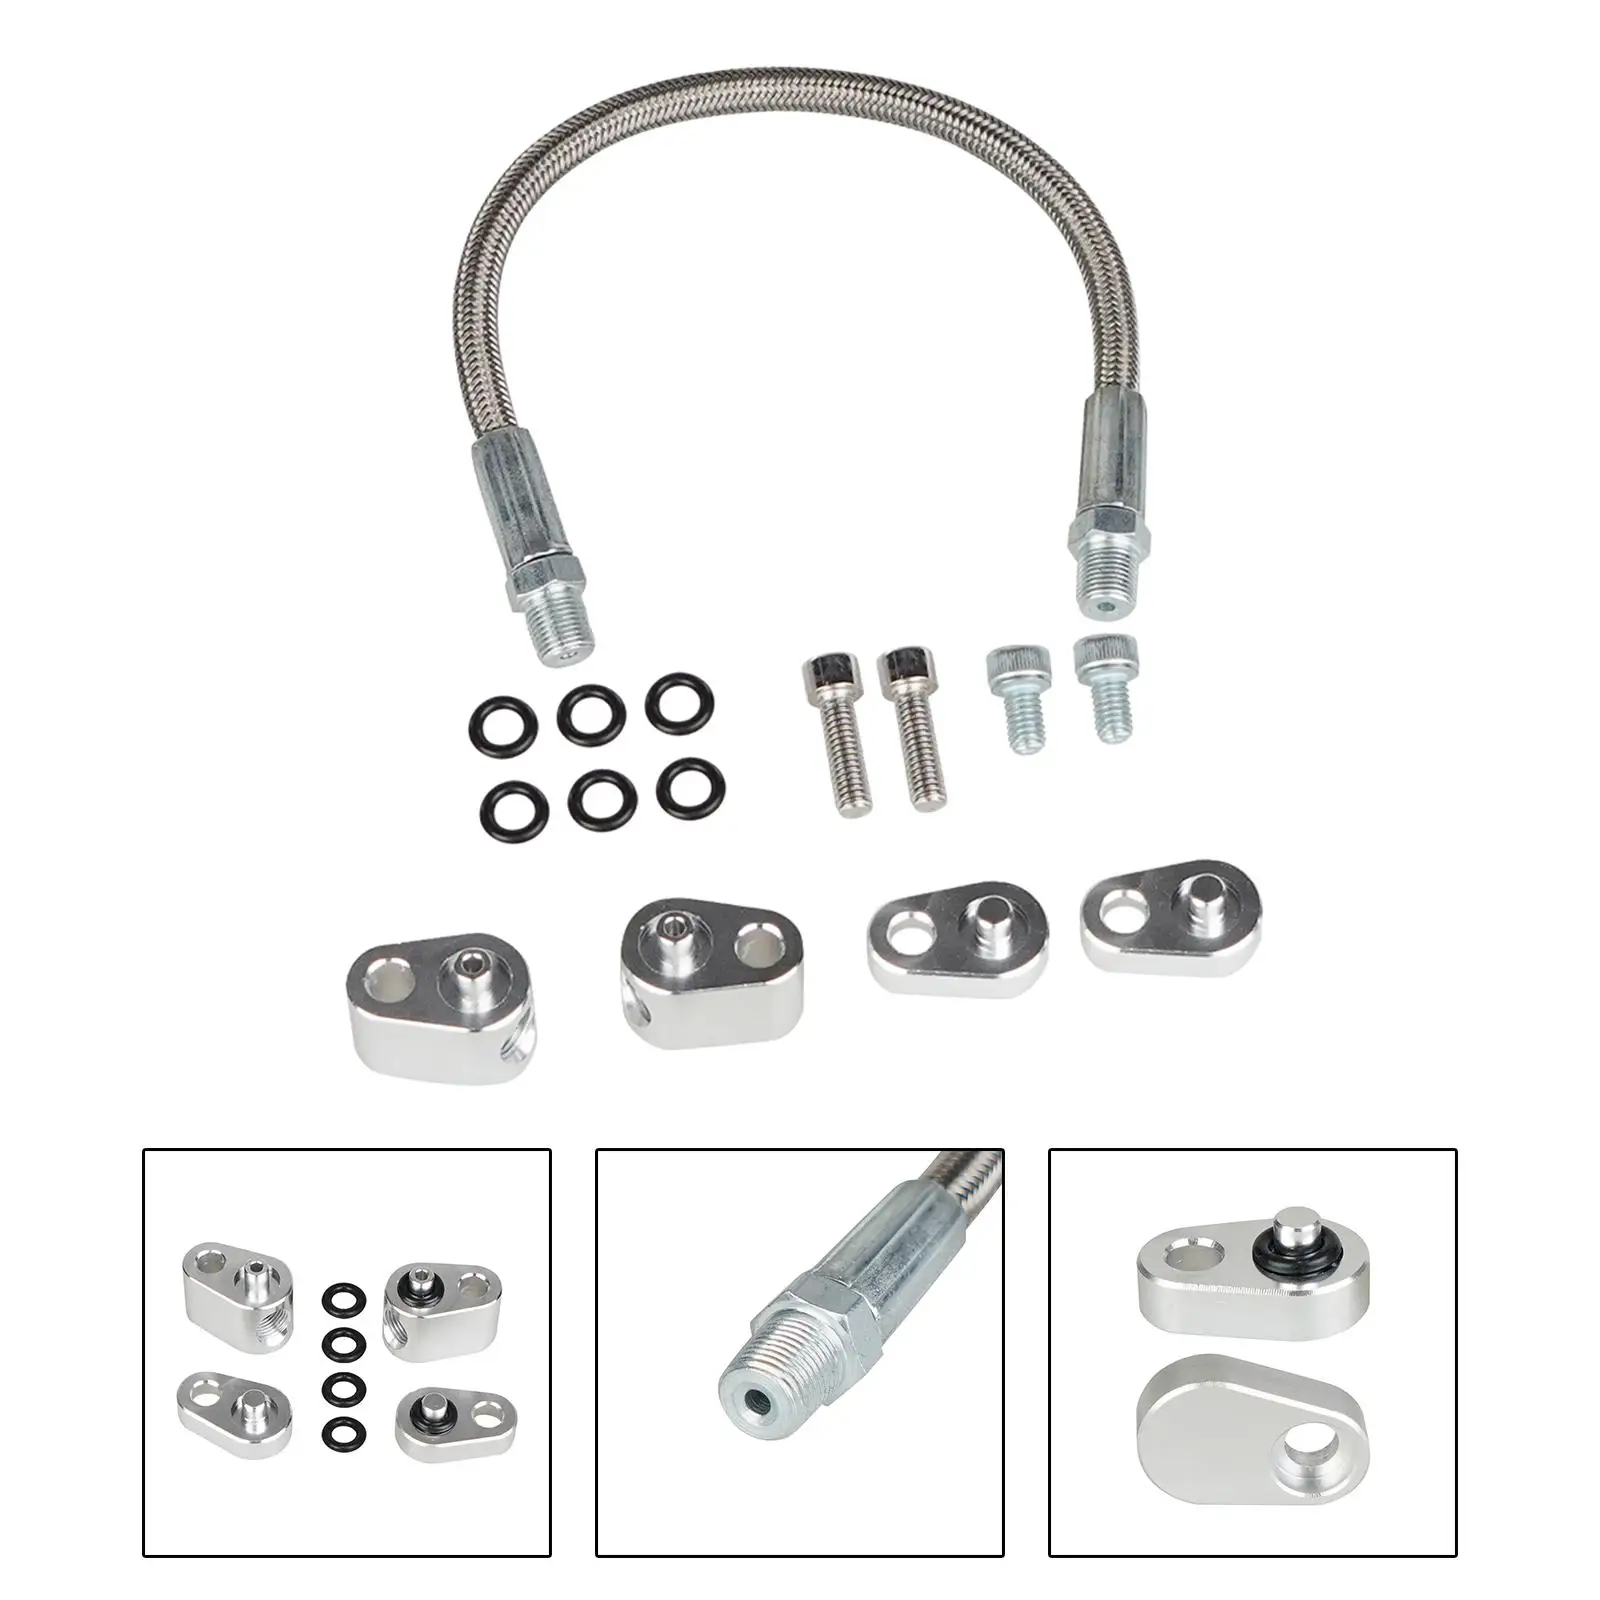 Coolant Crossover Easy Install Steam Port Kits for GM LS Series Engines